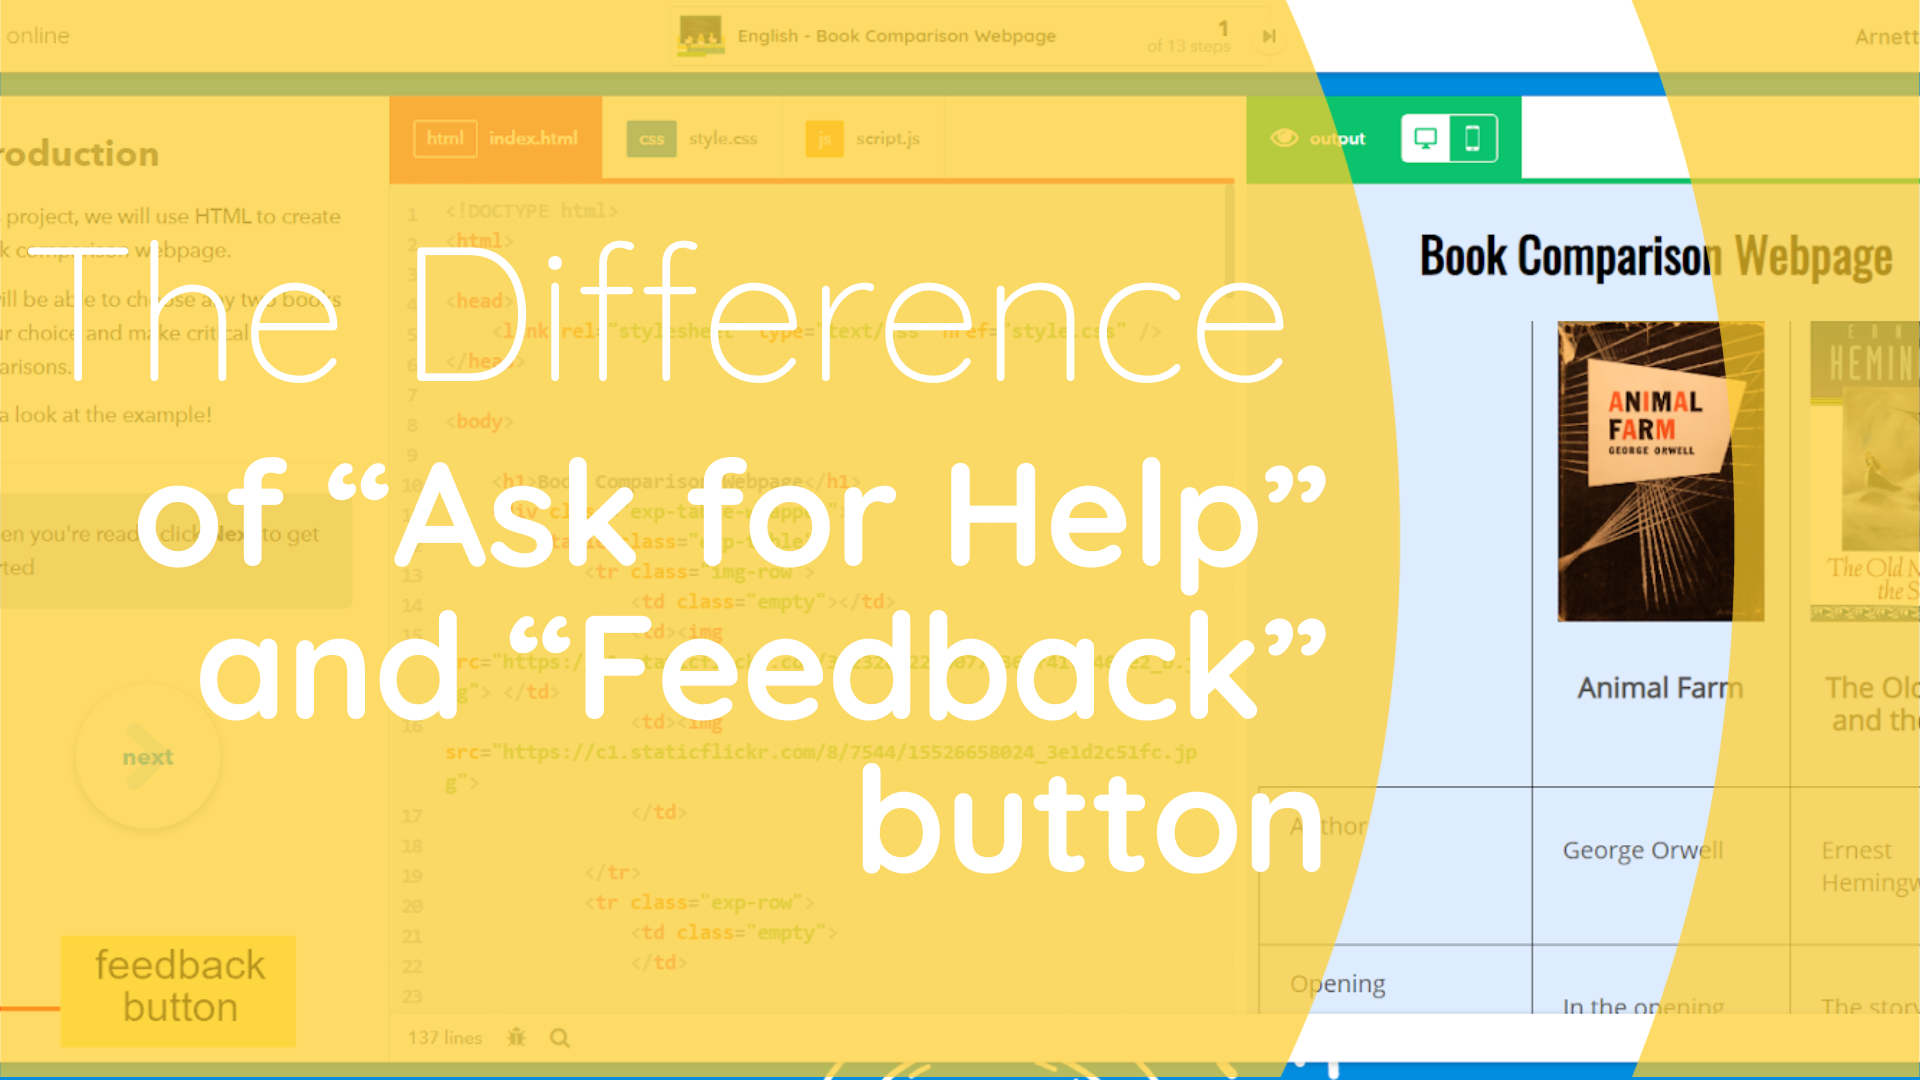 Difference of “Ask for Help” and “Feedback” button